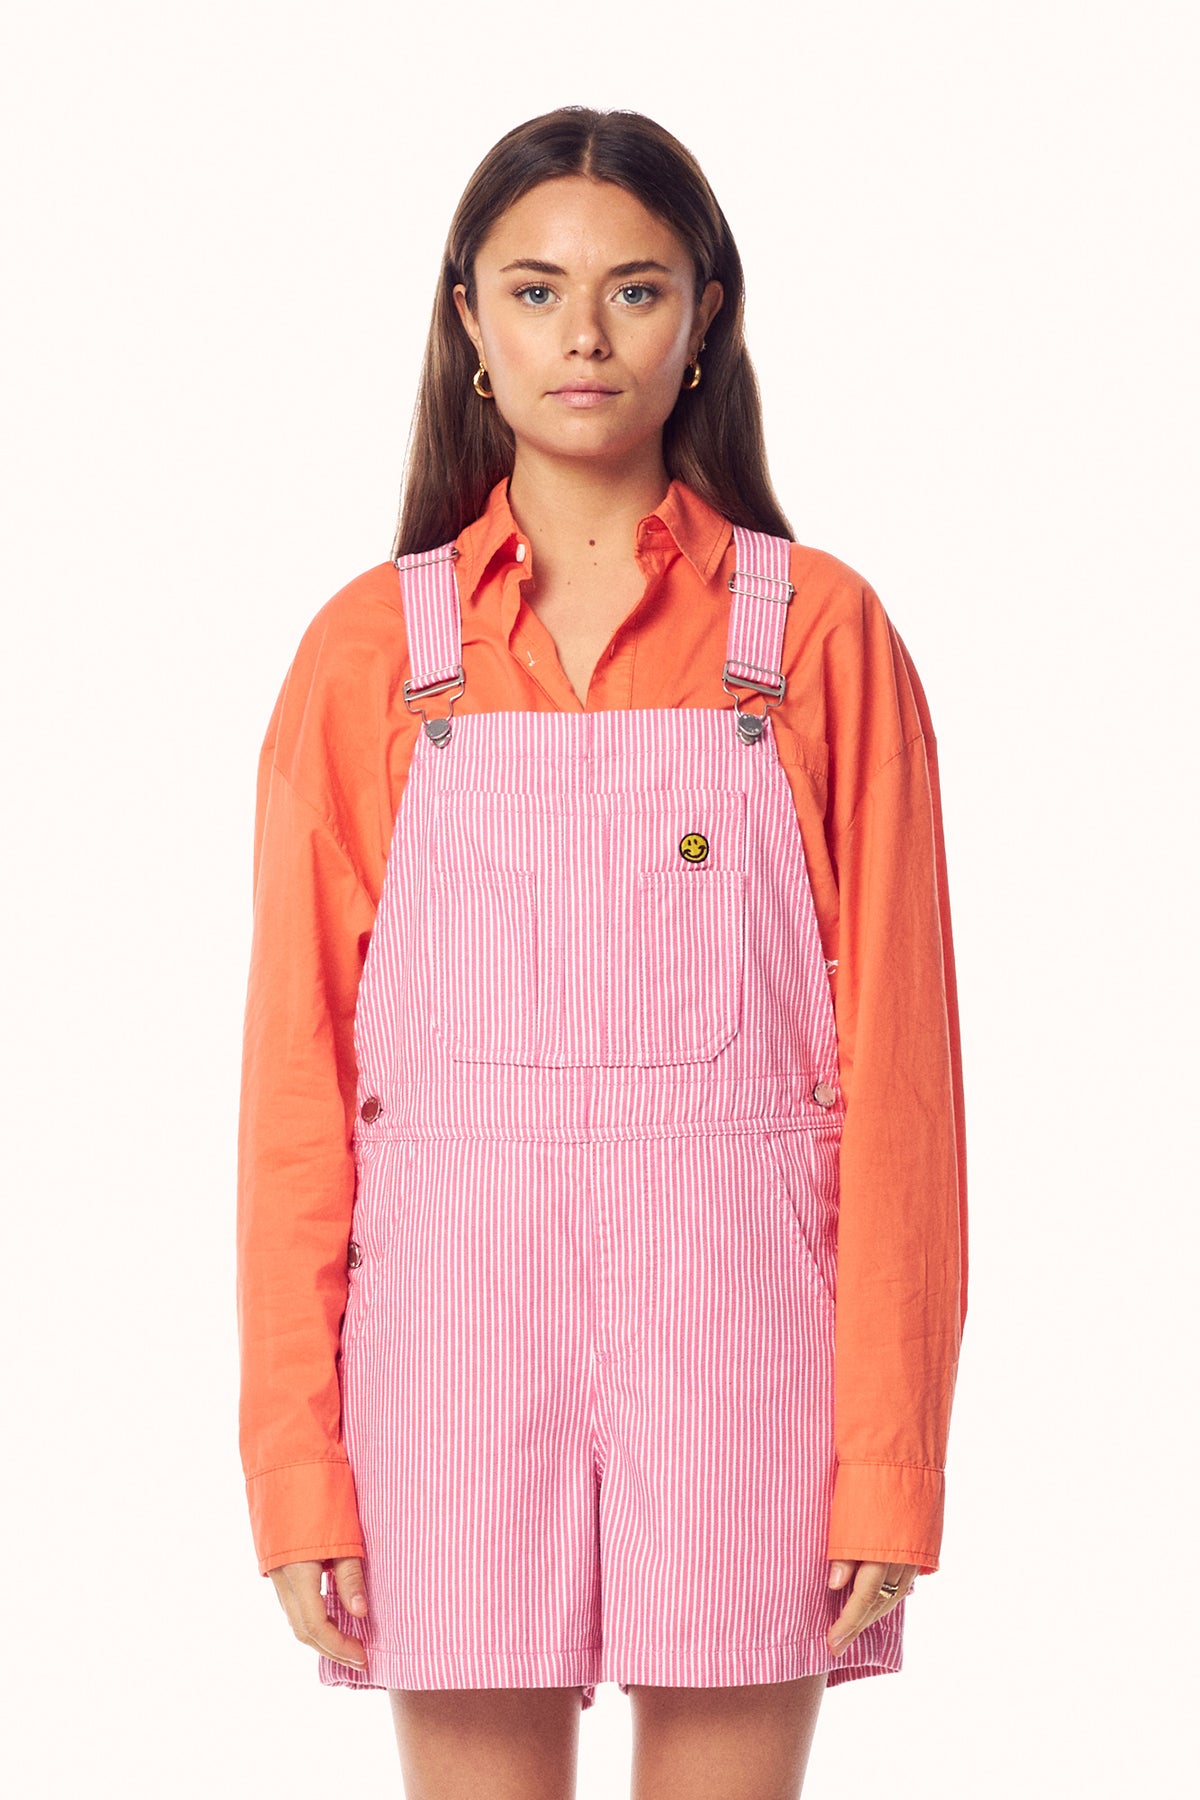 HEAVENLY PEOPLE SHORT OVERALL - CANDY PINK STRIPE